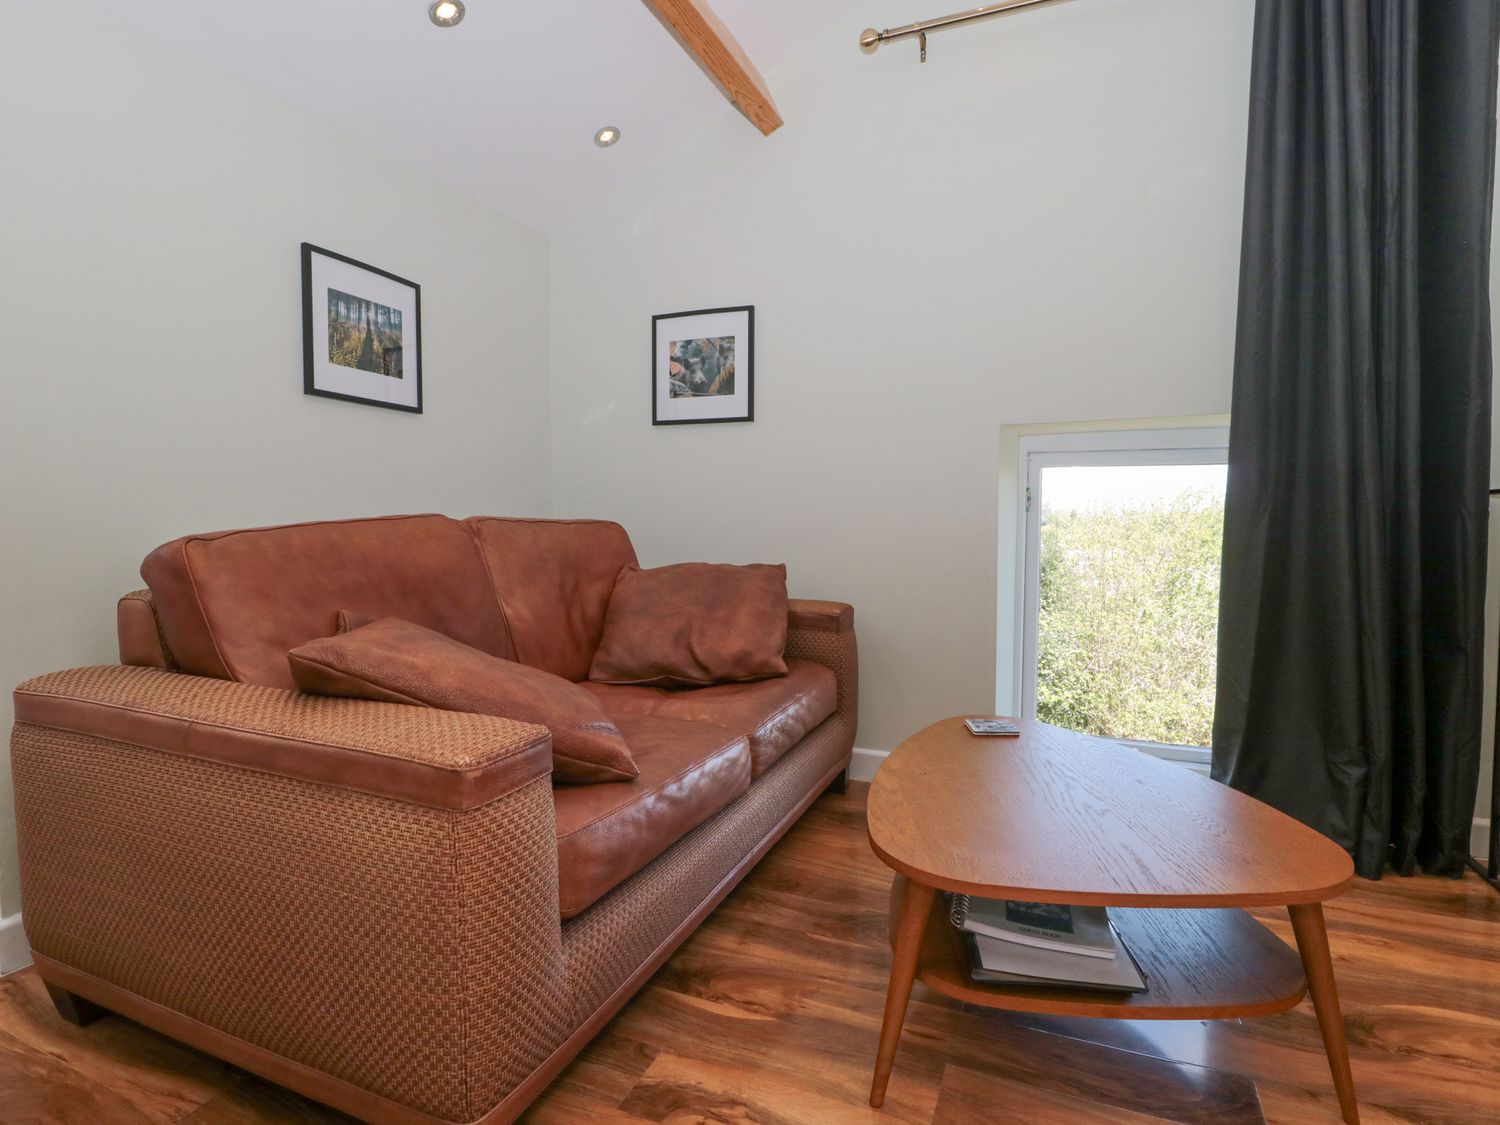 The Tall is located in Blakeney, Gloucestershire. Hot tub. Private garden. WiFi. Close to amenities.